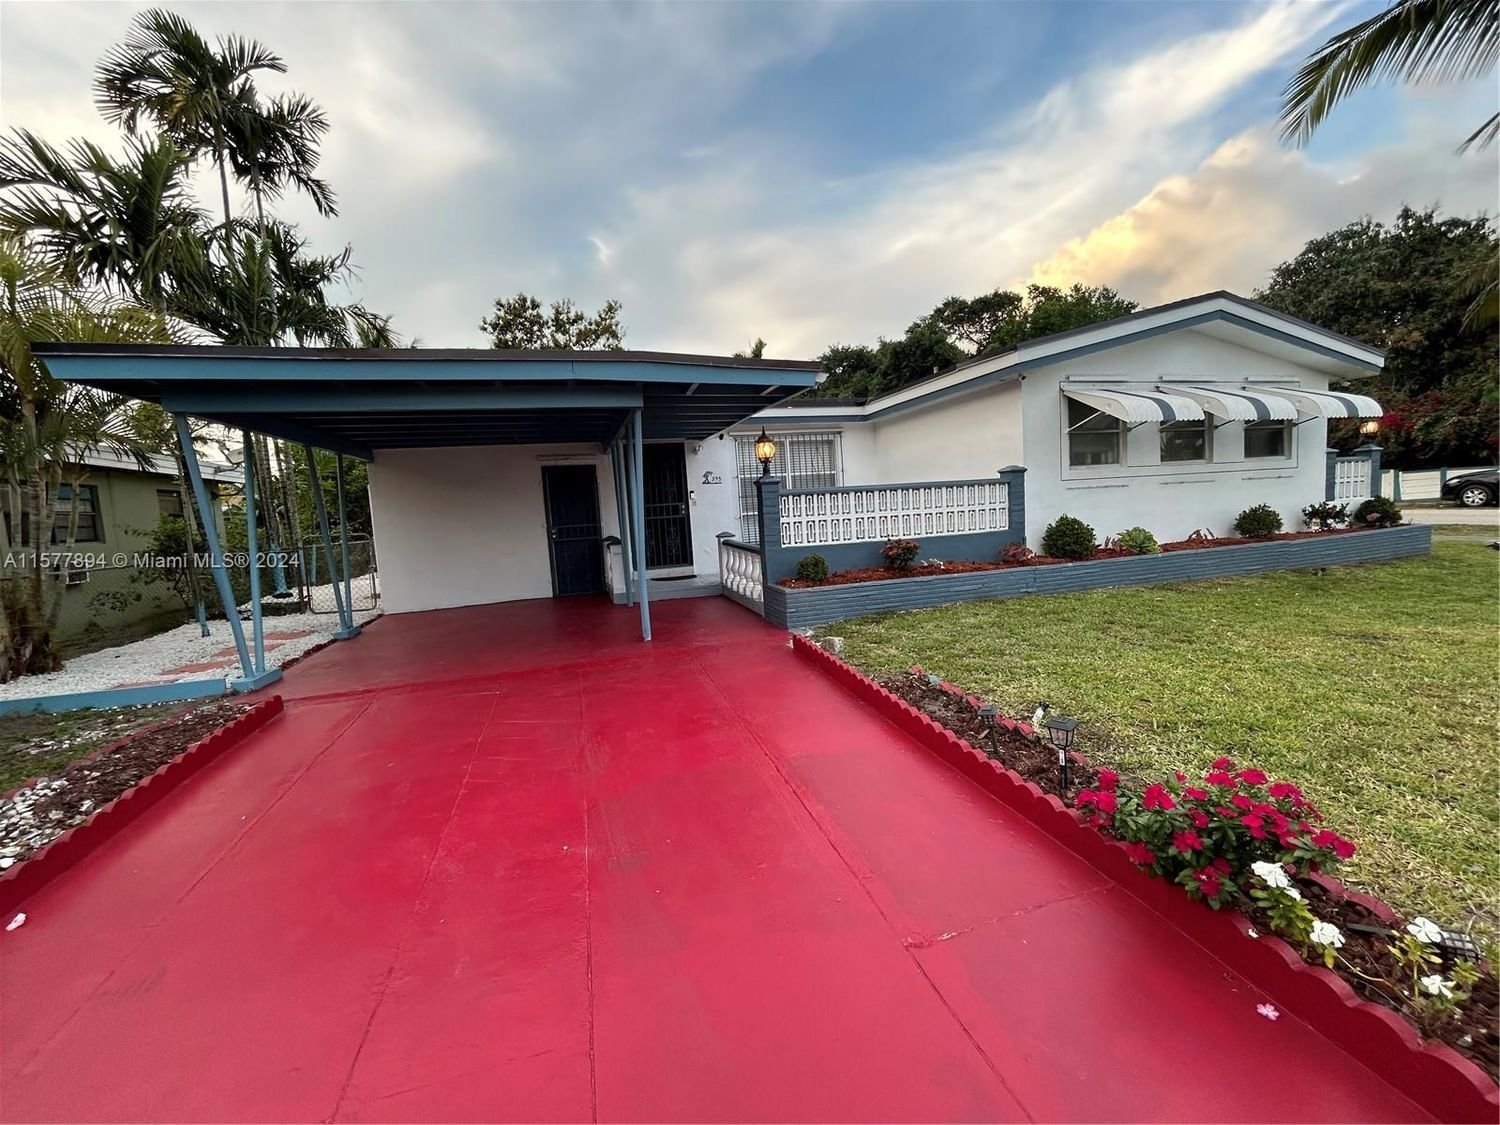 Real estate property located at 395 159th St, Miami-Dade County, FULFORD HIGHLANDS SECOND, Miami, FL